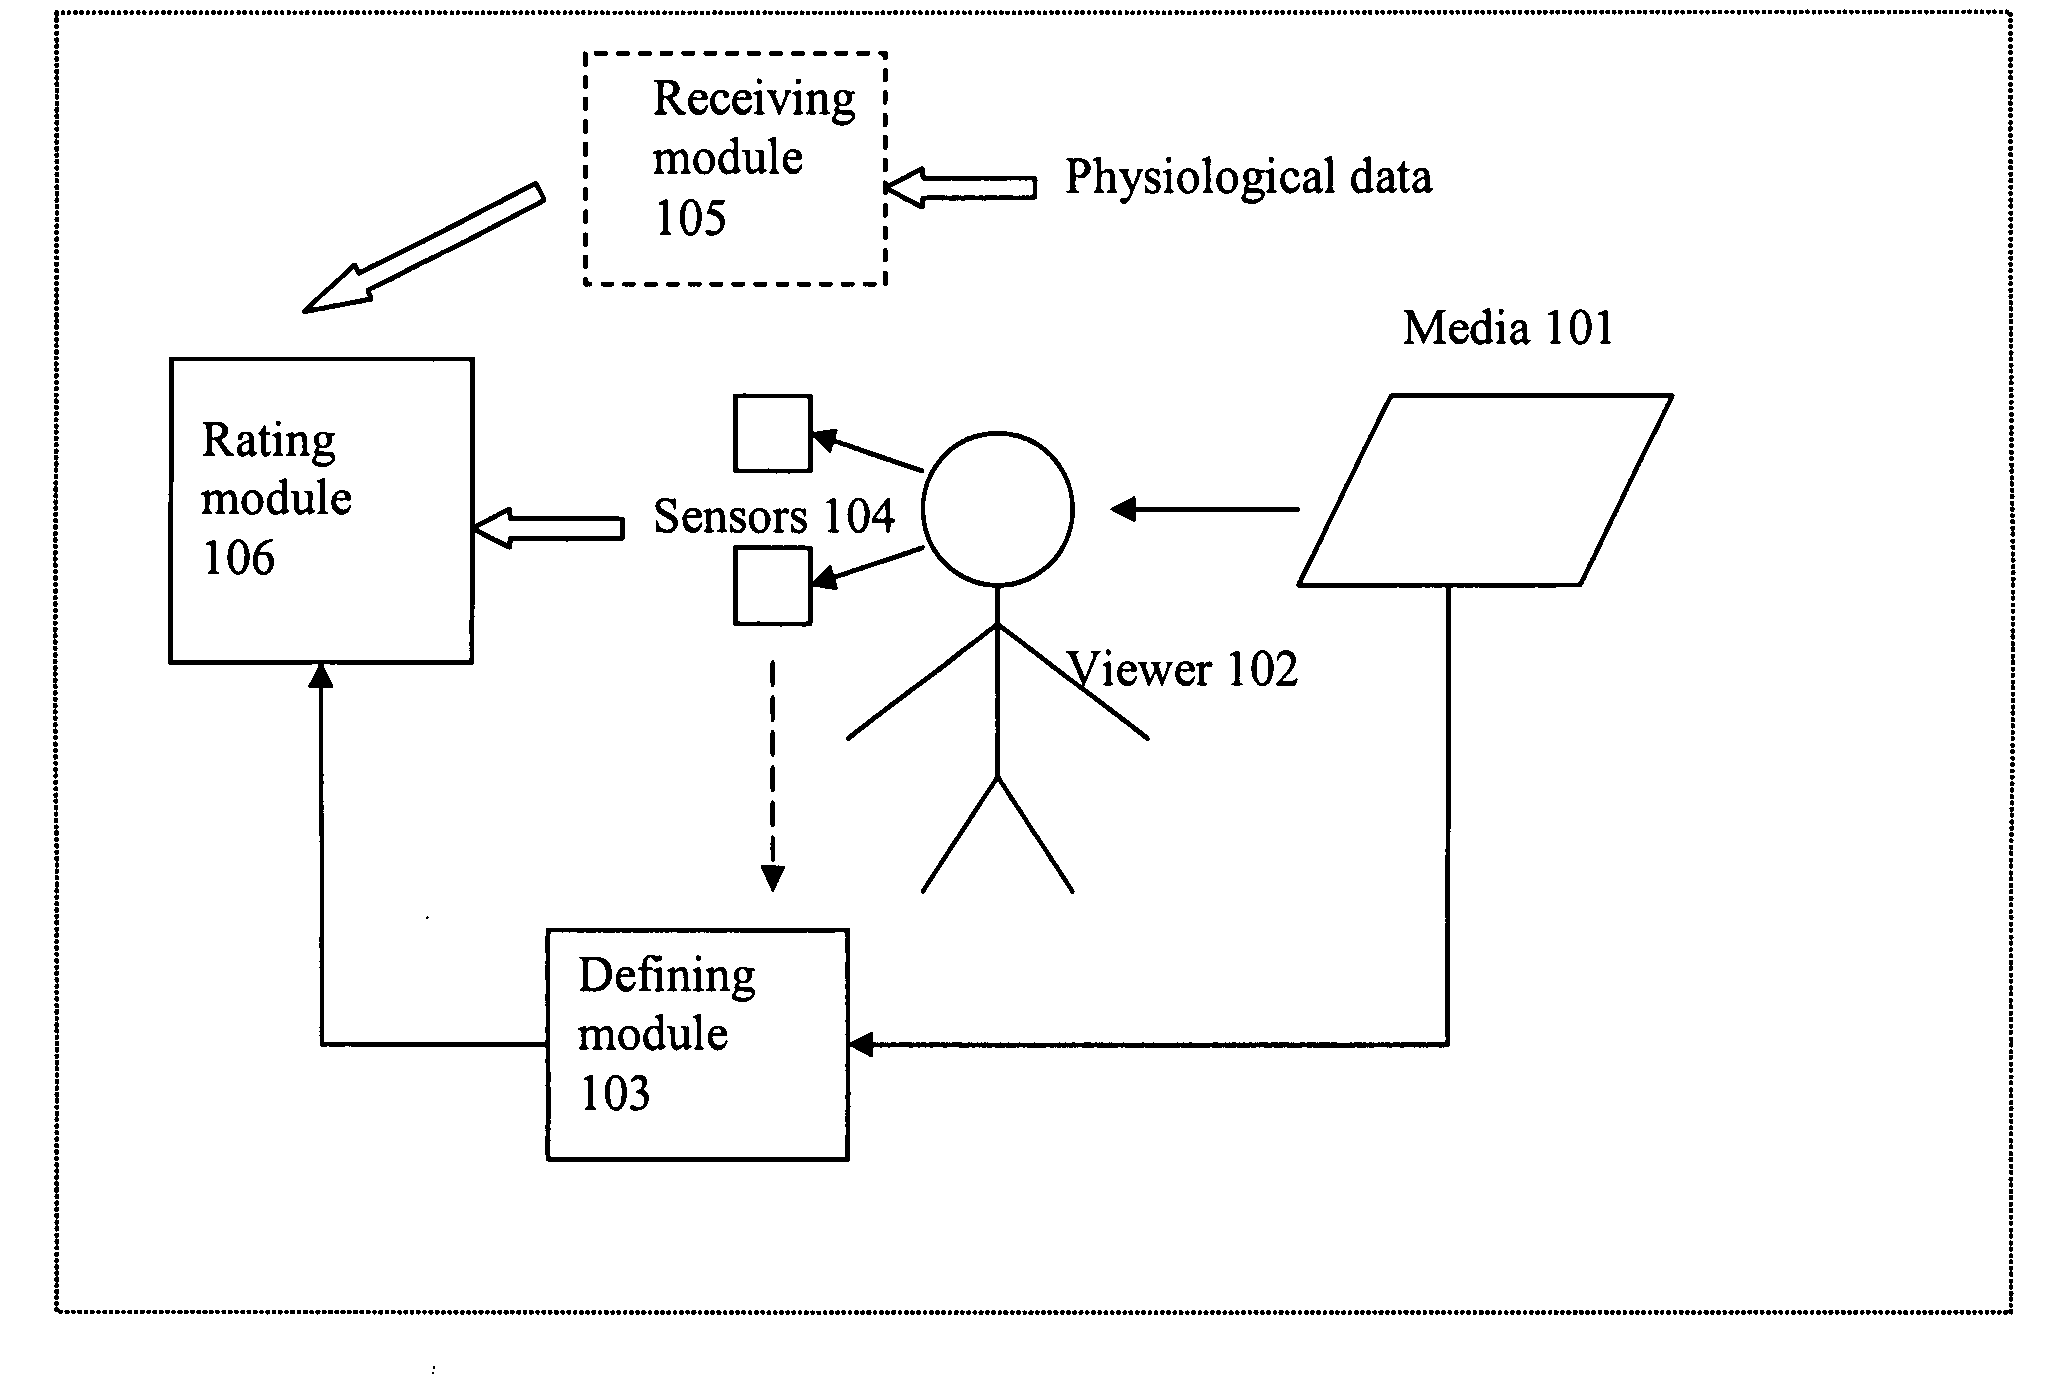 Method and system for rating media and events in media based on physiological data